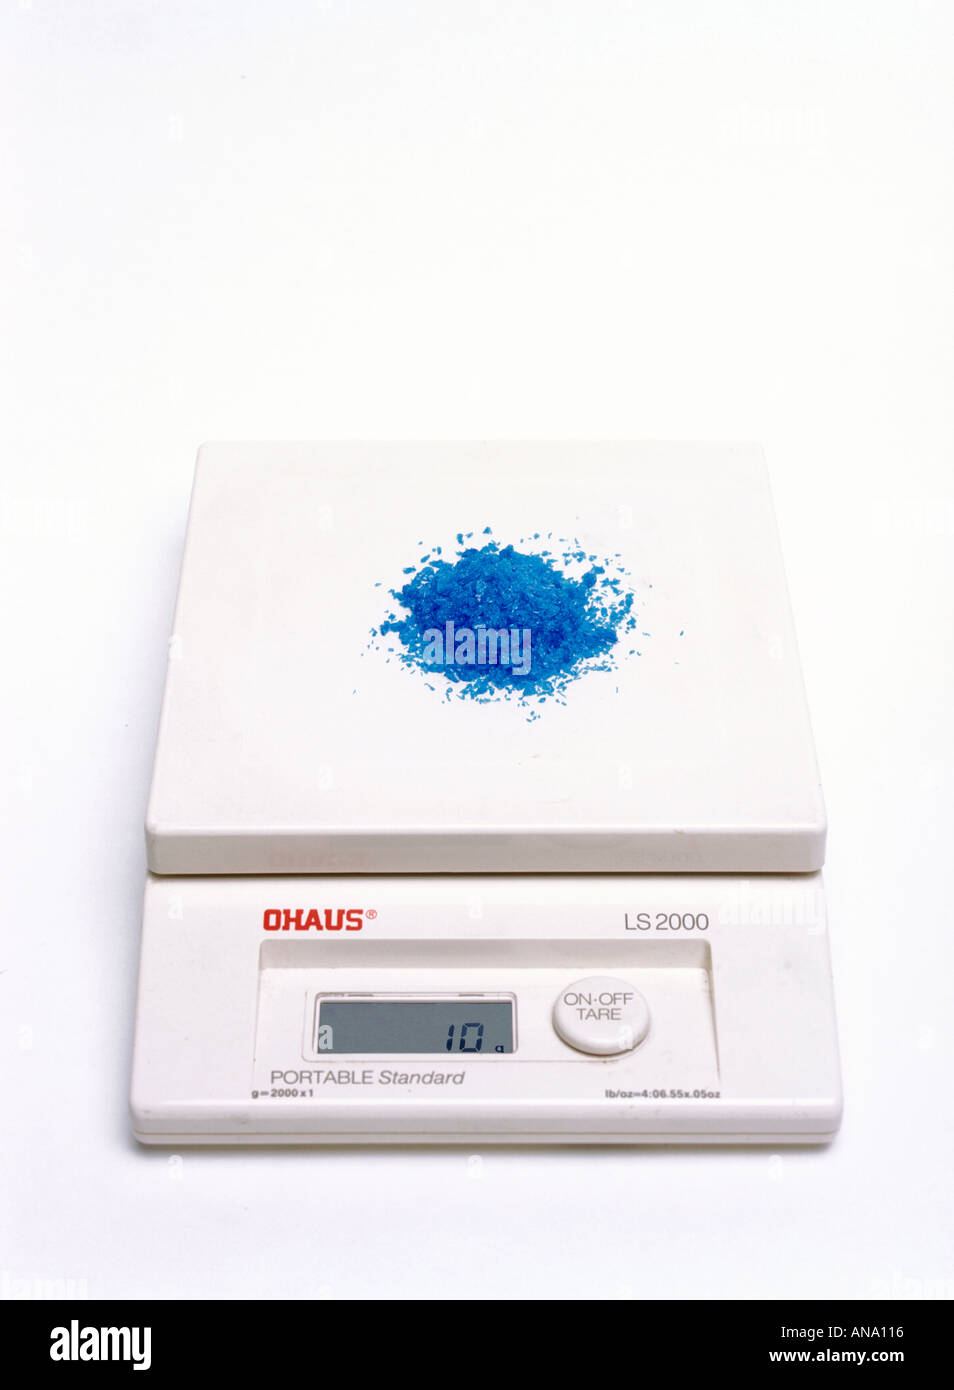 Copper sulphate crystals weigh 10g ( 1 of 3 to illustrate conservation of mass see ANA 115 and ANA 117) Stock Photo